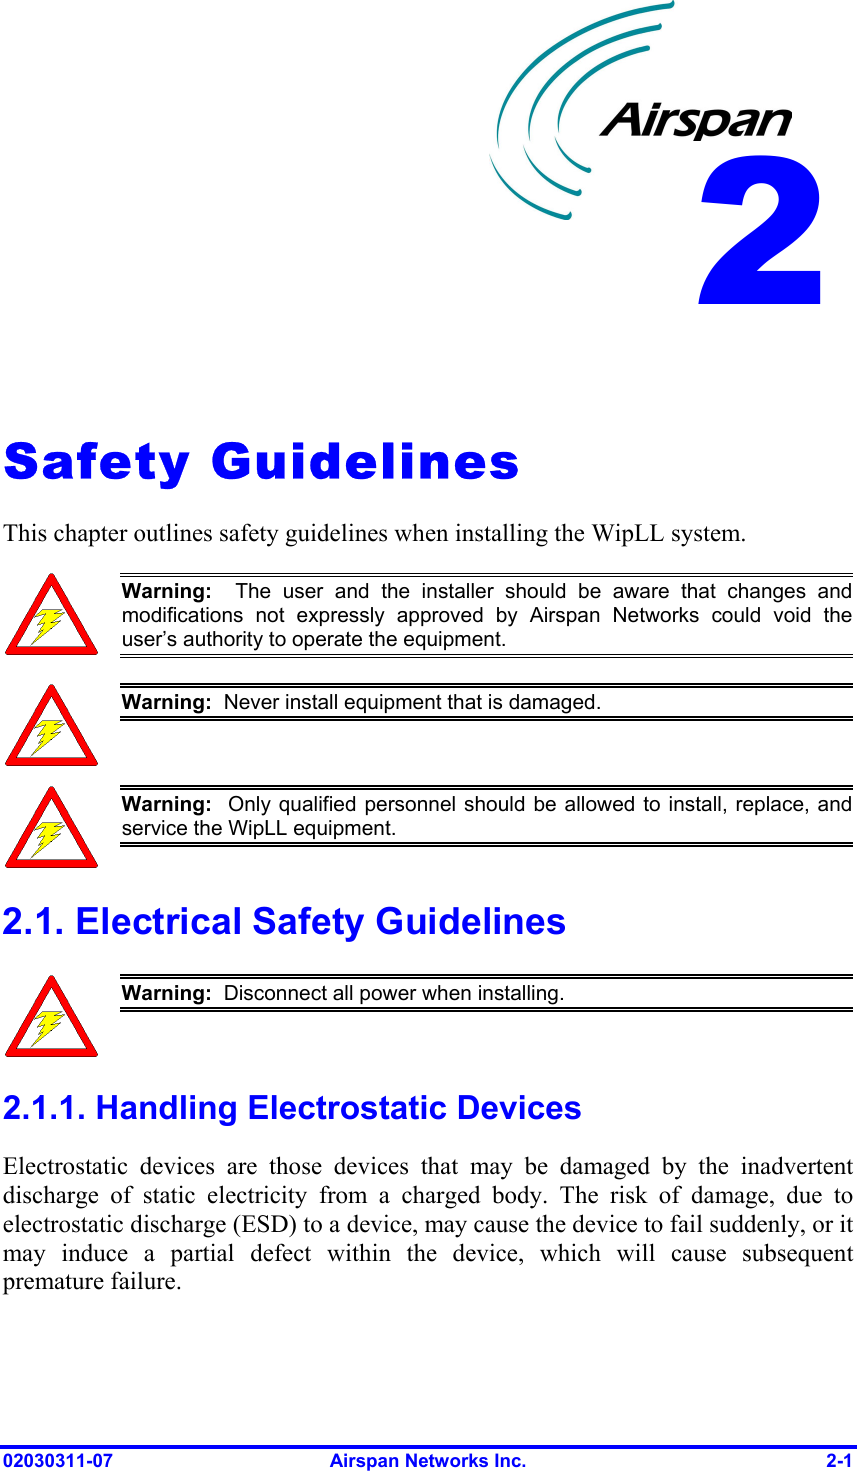  02030311-07  Airspan Networks Inc.  2-1   Safety Guidelines This chapter outlines safety guidelines when installing the WipLL system.  Warning:  The user and the installer should be aware that changes andmodifications not expressly approved by Airspan Networks could void theuser’s authority to operate the equipment.  Warning:  Never install equipment that is damaged.  Warning:  Only qualified personnel should be allowed to install, replace, andservice the WipLL equipment. 2.1. Electrical Safety Guidelines  Warning:  Disconnect all power when installing. 2.1.1. Handling Electrostatic Devices Electrostatic devices are those devices that may be damaged by the inadvertent discharge of static electricity from a charged body. The risk of damage, due to electrostatic discharge (ESD) to a device, may cause the device to fail suddenly, or it may induce a partial defect within the device, which will cause subsequent premature failure. 2 